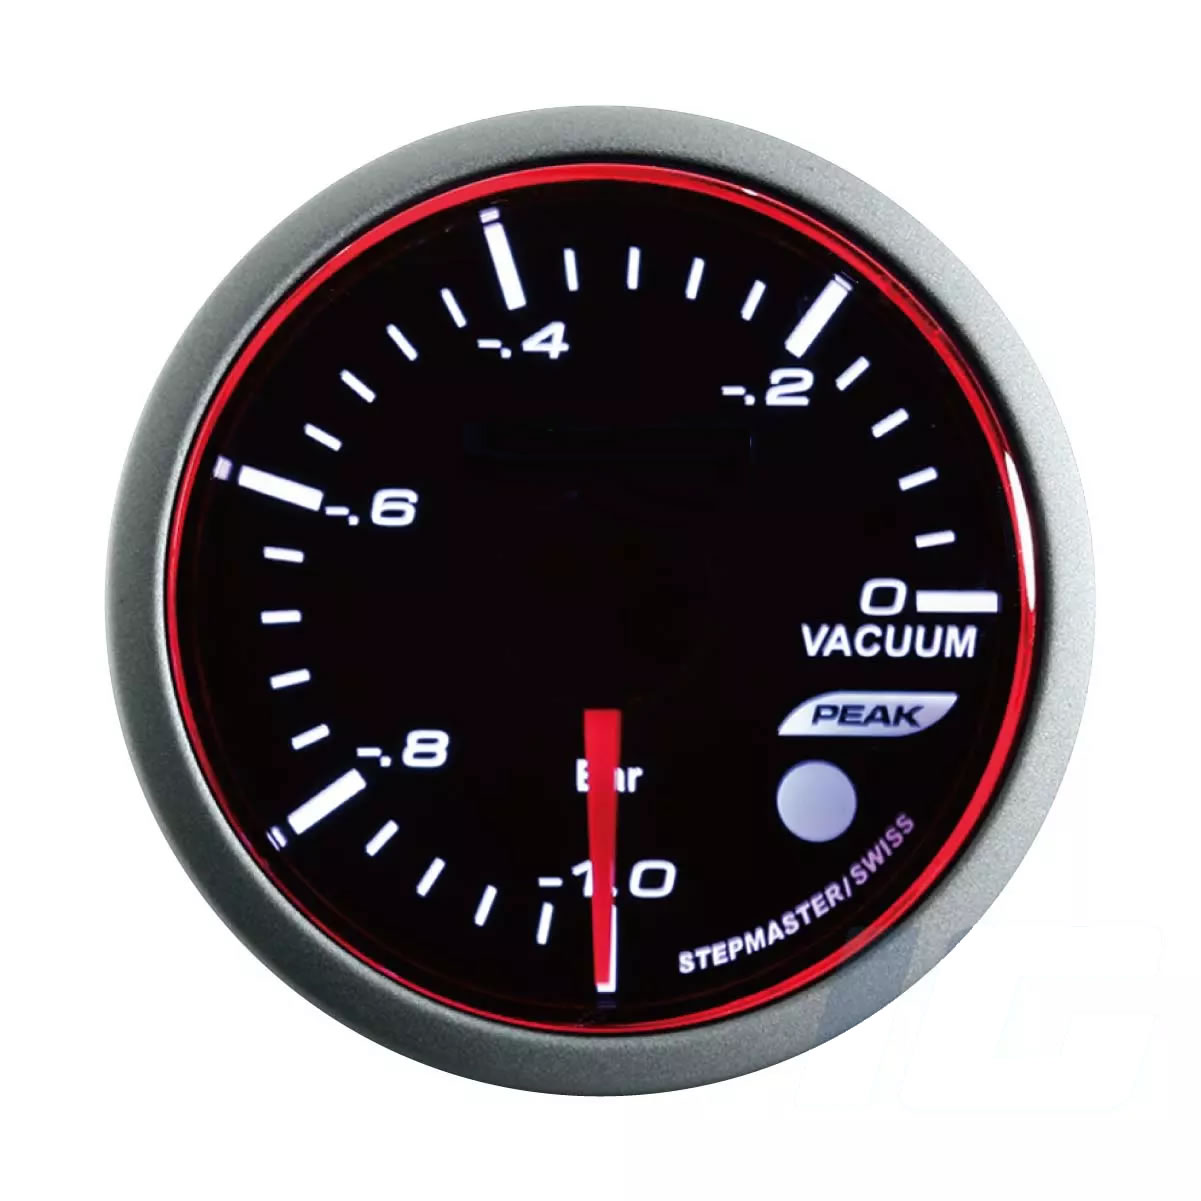 60mm White and Blue and Amber LED Performance Car Gauges - Vacuum Gauge With Sensor and Warning and Peak For Your Sport Racing Car